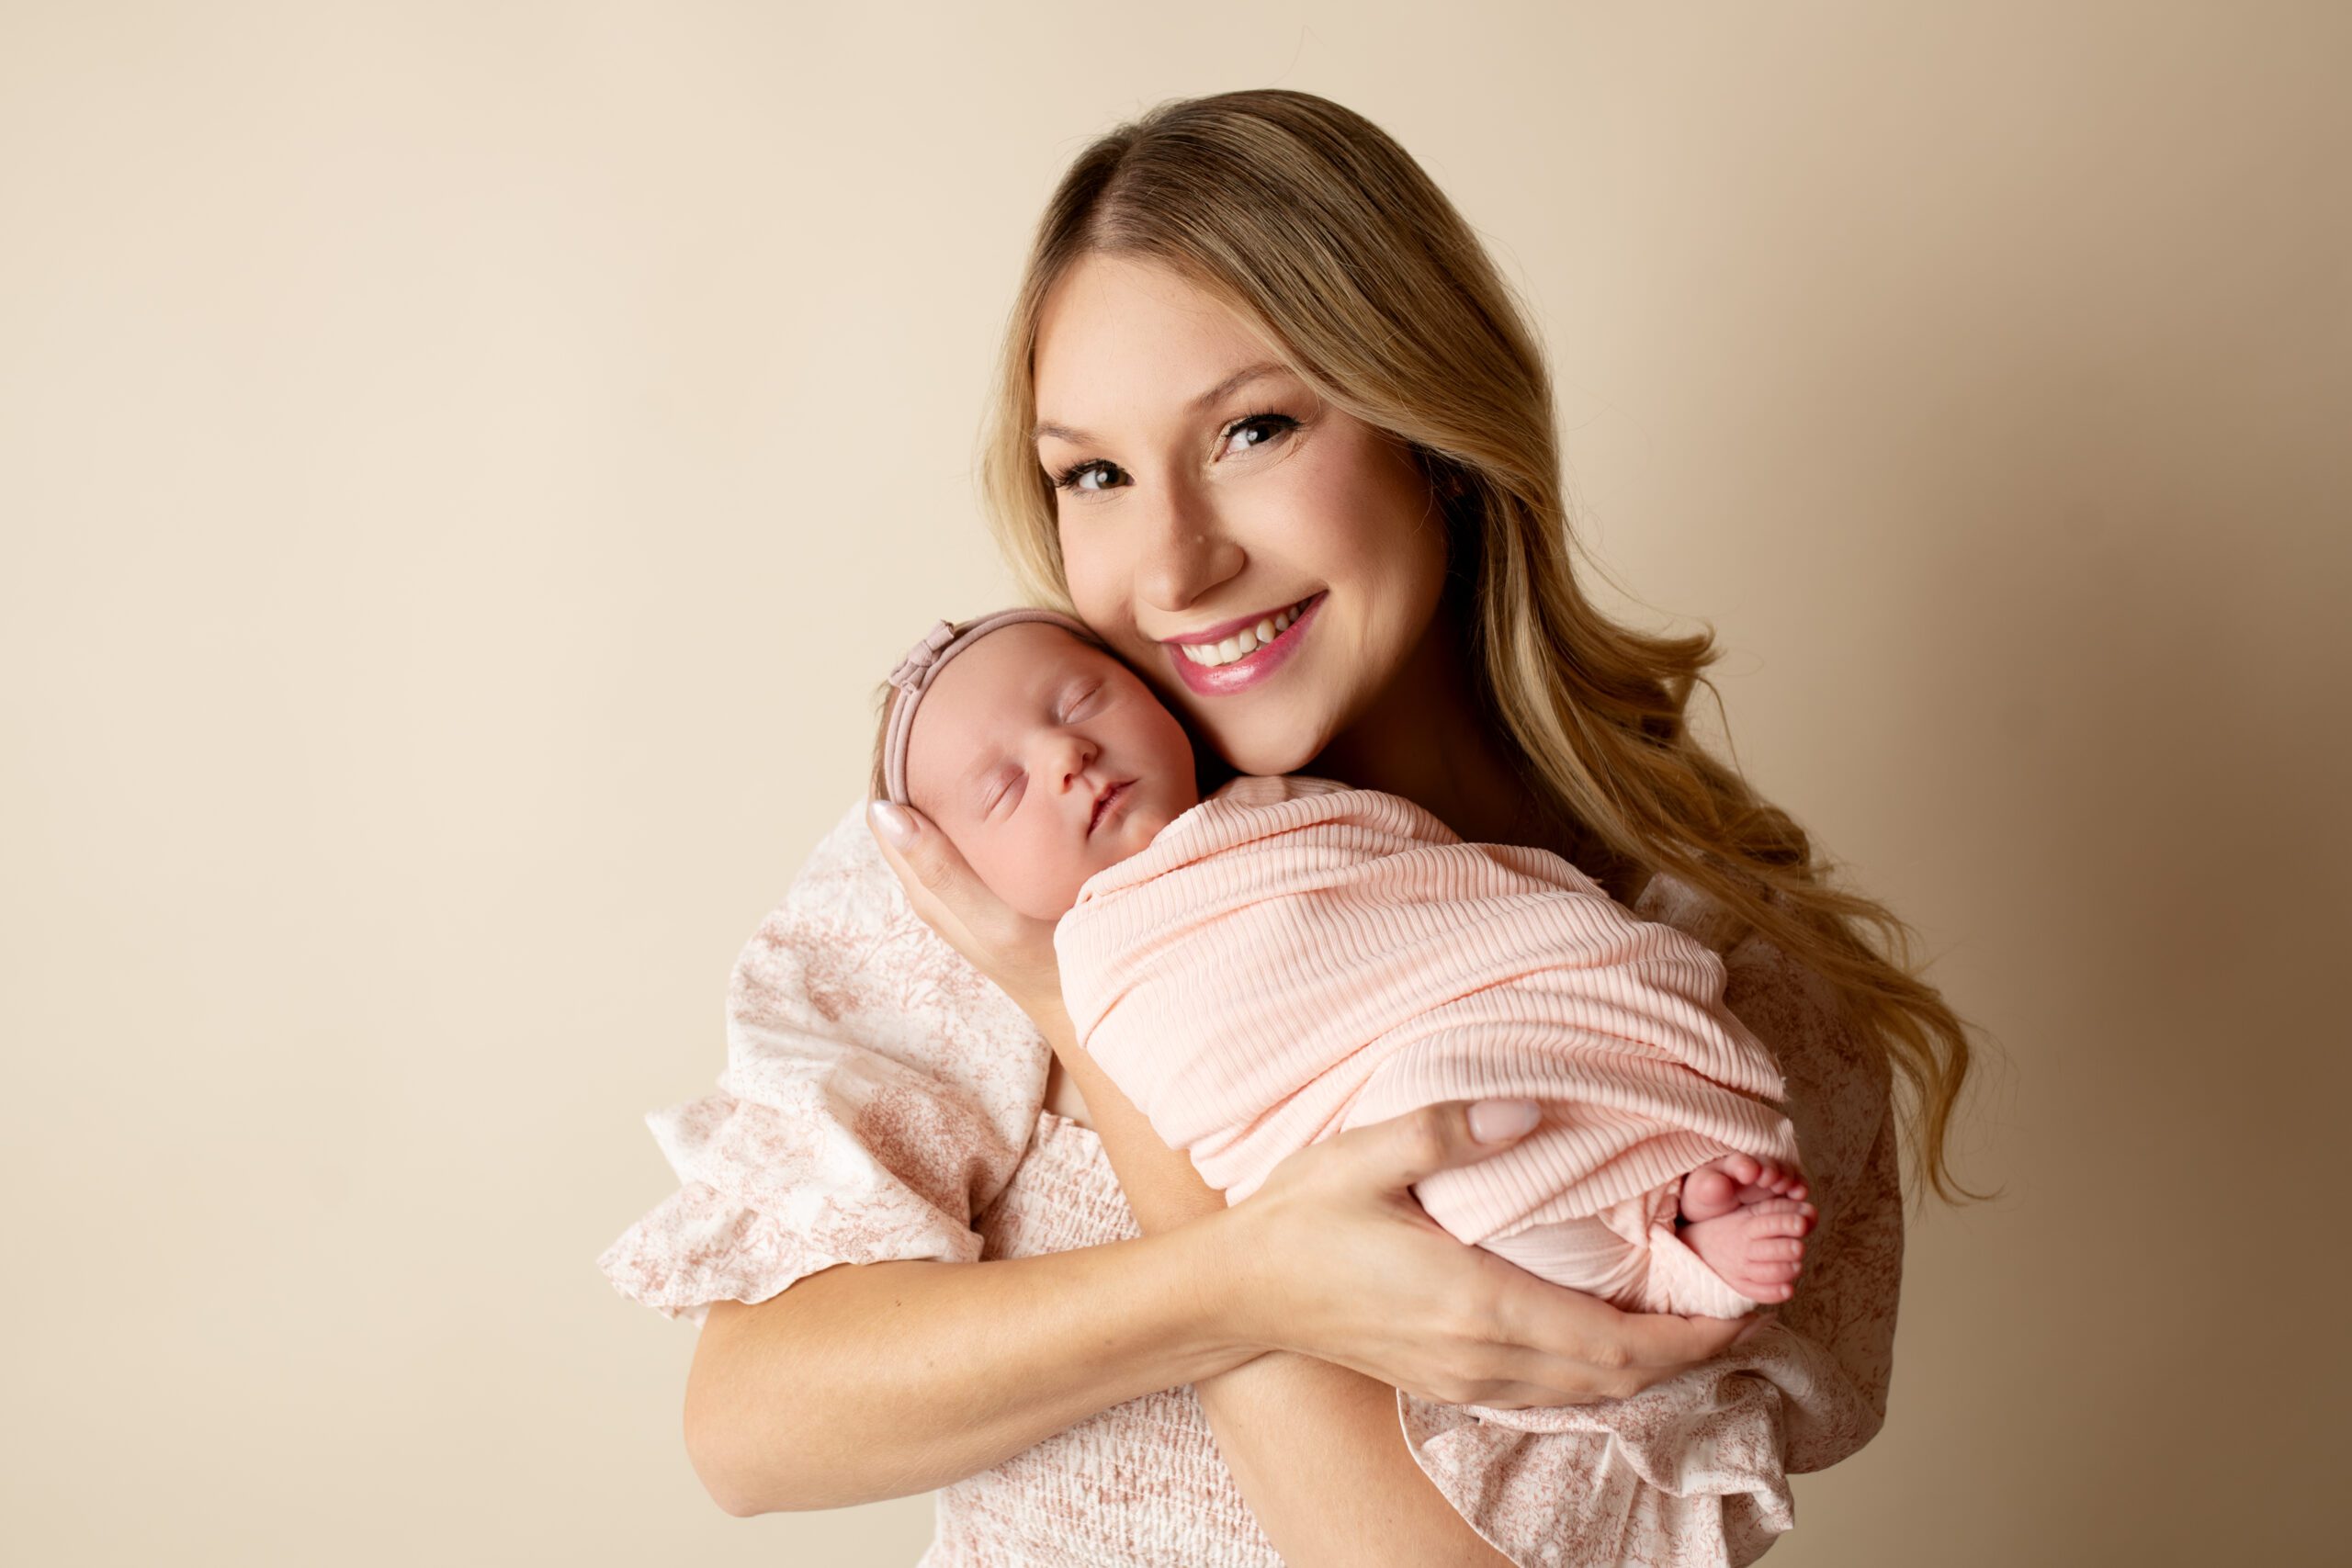 a new mother is holding her newborn daughter up her her face and is looking and smiling at the camera. baby is sleeping and swaddled in a light pink swaddle.
